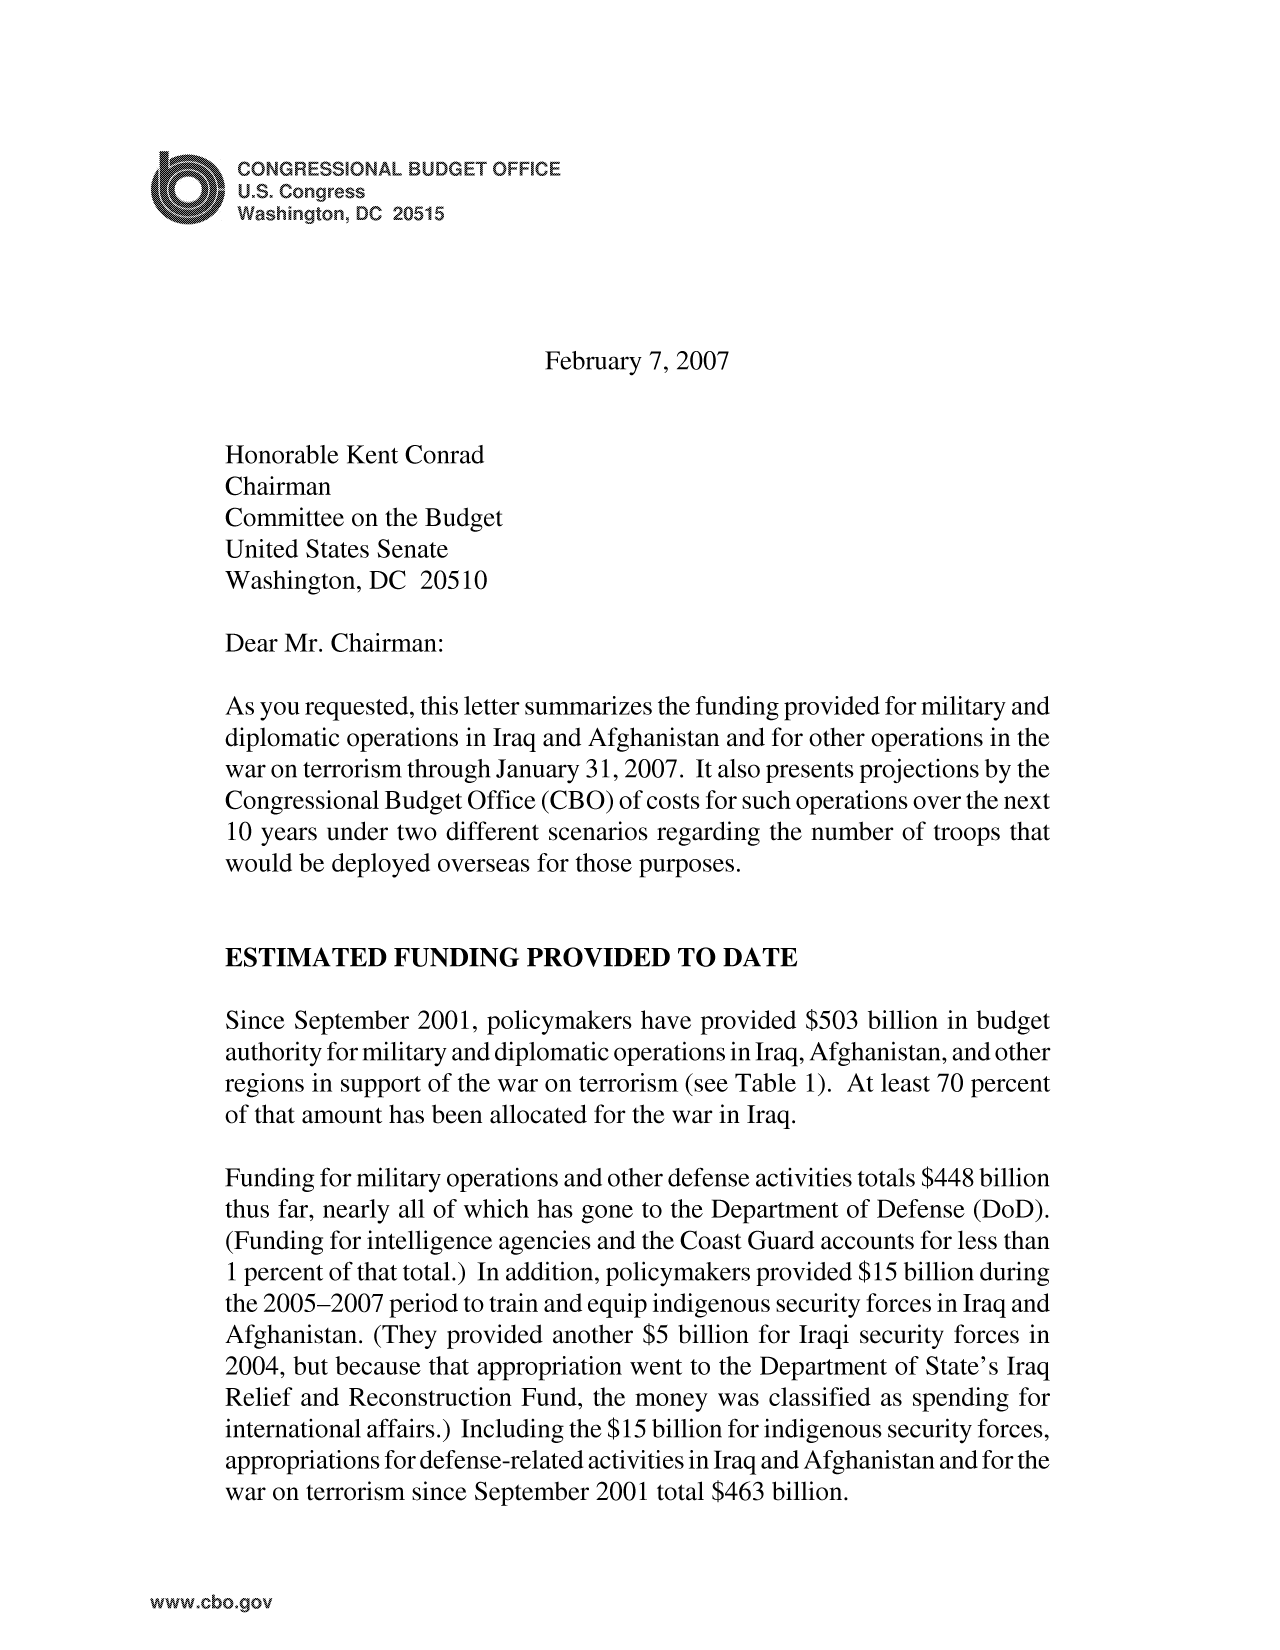 handle is hein.congrec/cbo10034 and id is 1 raw text is: CONGRESSIONAL BUDGET OFFICE
U.S. Congress
Washington, DC 20515
February 7, 2007
Honorable Kent Conrad
Chairman
Committee on the Budget
United States Senate
Washington, DC 20510
Dear Mr. Chairman:
As you requested, this letter summarizes the funding provided for military and
diplomatic operations in Iraq and Afghanistan and for other operations in the
war on terrorism through January 31, 2007. It also presents projections by the
Congressional Budget Office (CBO) of costs for such operations over the next
10 years under two different scenarios regarding the number of troops that
would be deployed overseas for those purposes.
ESTIMATED FUNDING PROVIDED TO DATE
Since September 2001, policymakers have provided $503 billion in budget
authority for military and diplomatic operations in Iraq, Afghanistan, and other
regions in support of the war on terrorism (see Table 1). At least 70 percent
of that amount has been allocated for the war in Iraq.
Funding for military operations and other defense activities totals $448 billion
thus far, nearly all of which has gone to the Department of Defense (DoD).
(Funding for intelligence agencies and the Coast Guard accounts for less than
1 percent of that total.) In addition, policymakers provided $15 billion during
the 2005-2007 period to train and equip indigenous security forces in Iraq and
Afghanistan. (They provided another $5 billion for Iraqi security forces in
2004, but because that appropriation went to the Department of State's Iraq
Relief and Reconstruction Fund, the money was classified as spending for
international affairs.) Including the $15 billion for indigenous security forces,
appropriations for defense-related activities in Iraq and Afghanistan and for the
war on terrorism since September 2001 total $463 billion.


